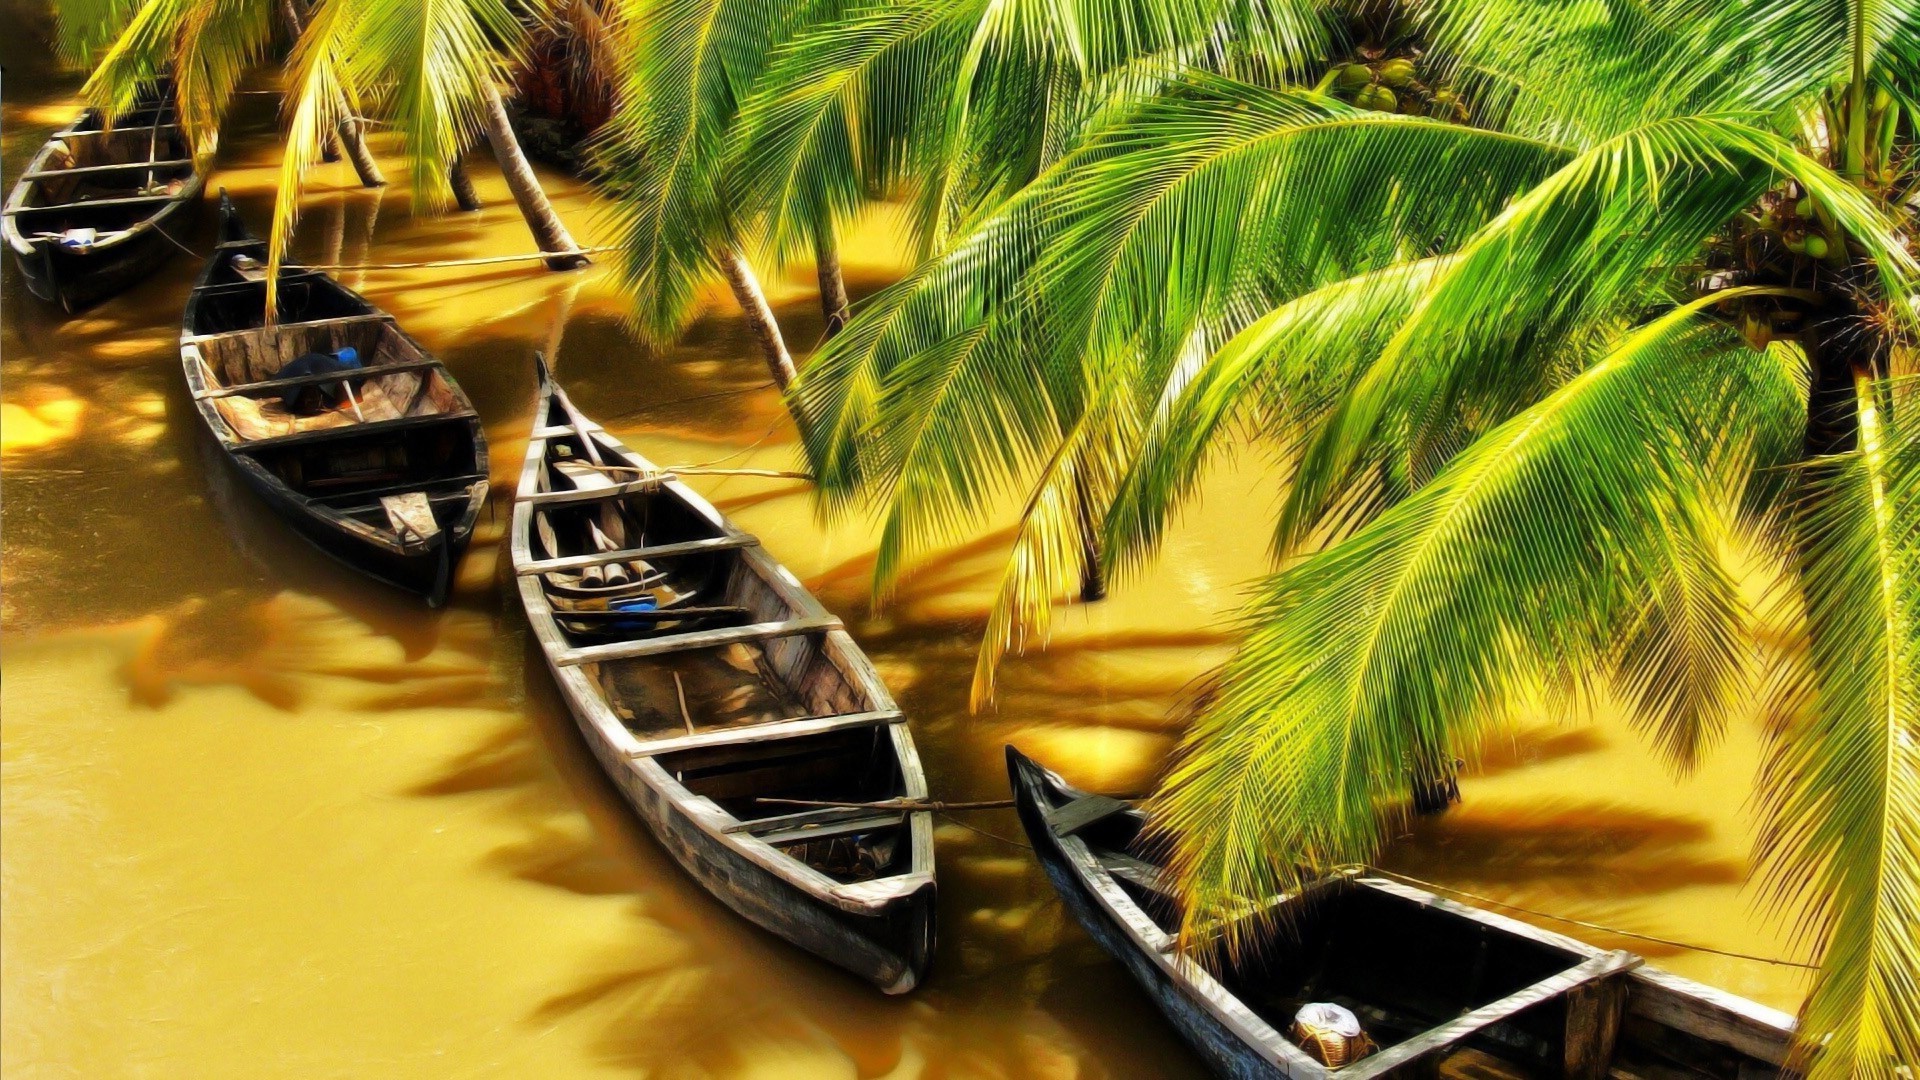 nature, Water, Boat, River, Palm Trees, India, Flood, Sunlight, Shadow, Wood Wallpaper